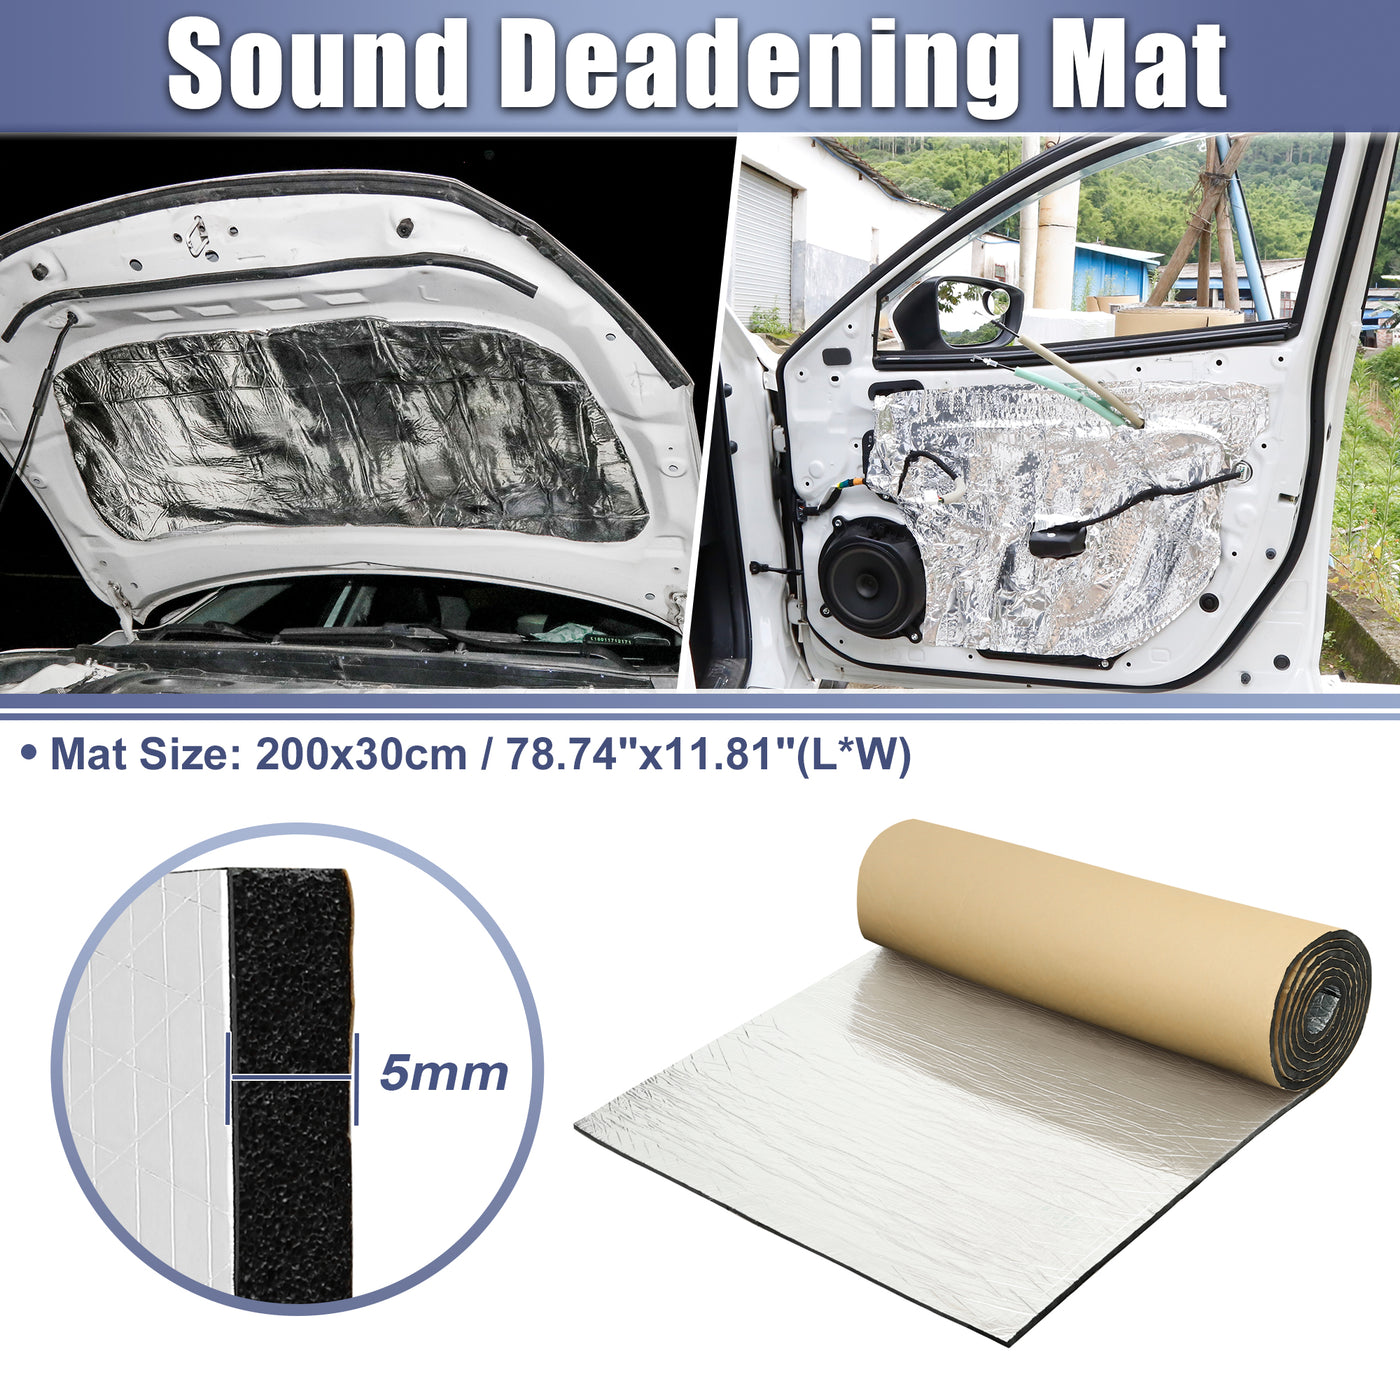 X AUTOHAUX 197mil 5mm 6.45sqft Car Sound Deadening Mat Aluminum Foil Closed Cell Foam Heat Shield Material Damping Self Adhesive Universal for Hood Fender and Boat Engine Cover 78.74"x11.81"